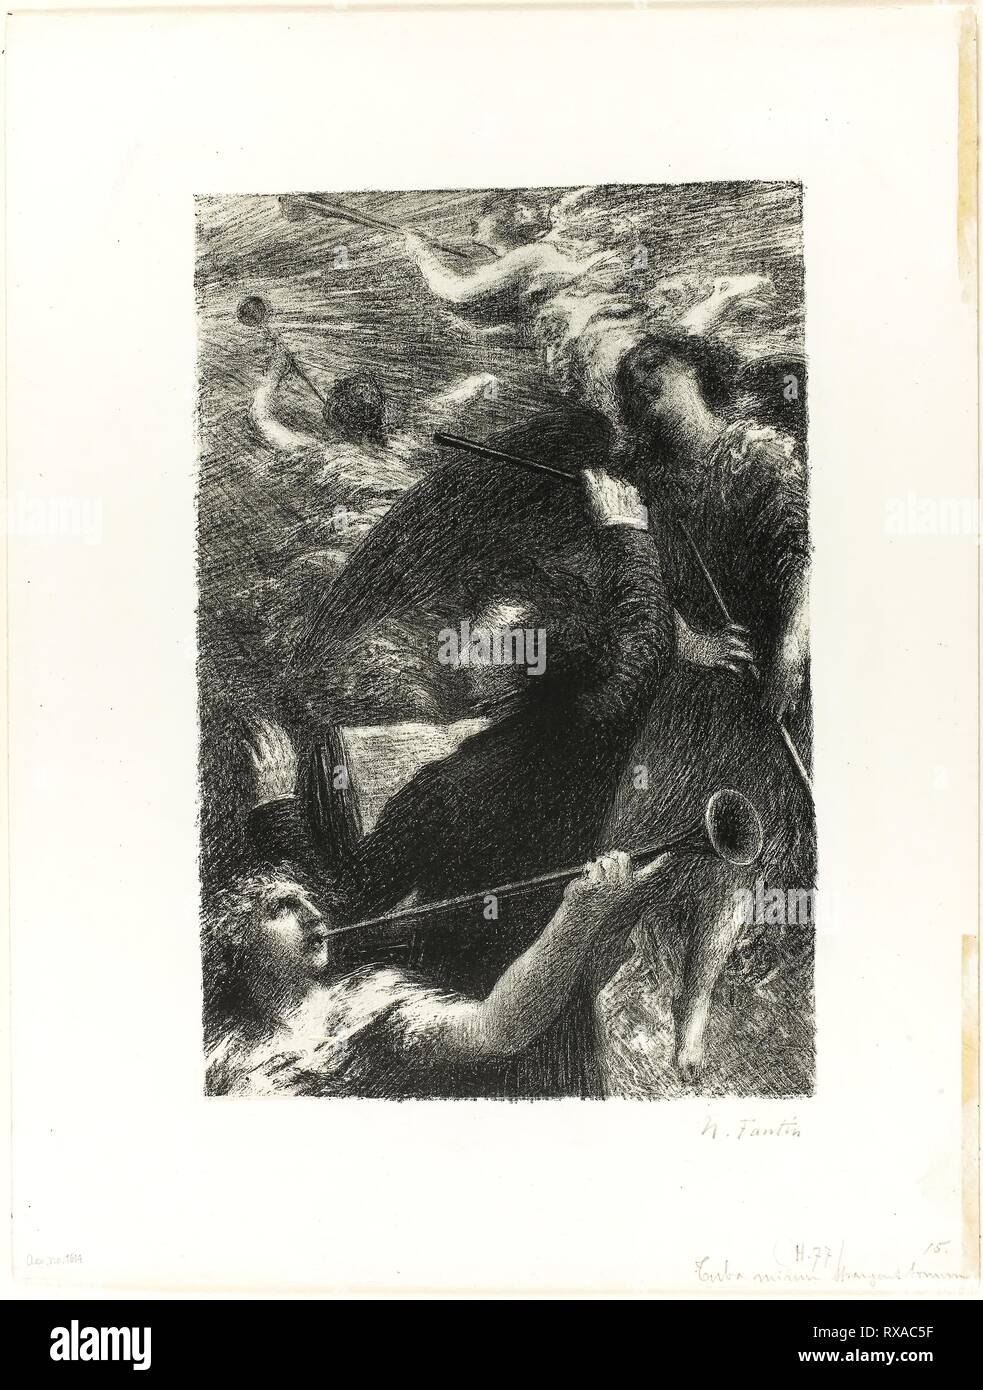 Tuba Mirum Spargens Sonum. Henri Fantin-Latour; French, 1836-1904. Date: 1883-1893. Dimensions: 235 × 155 mm (image); 327 × 246 mm (sheet). Lithograph in black on off-white China paper laid down on white wove paper. Origin: France. Museum: The Chicago Art Institute. Stock Photo